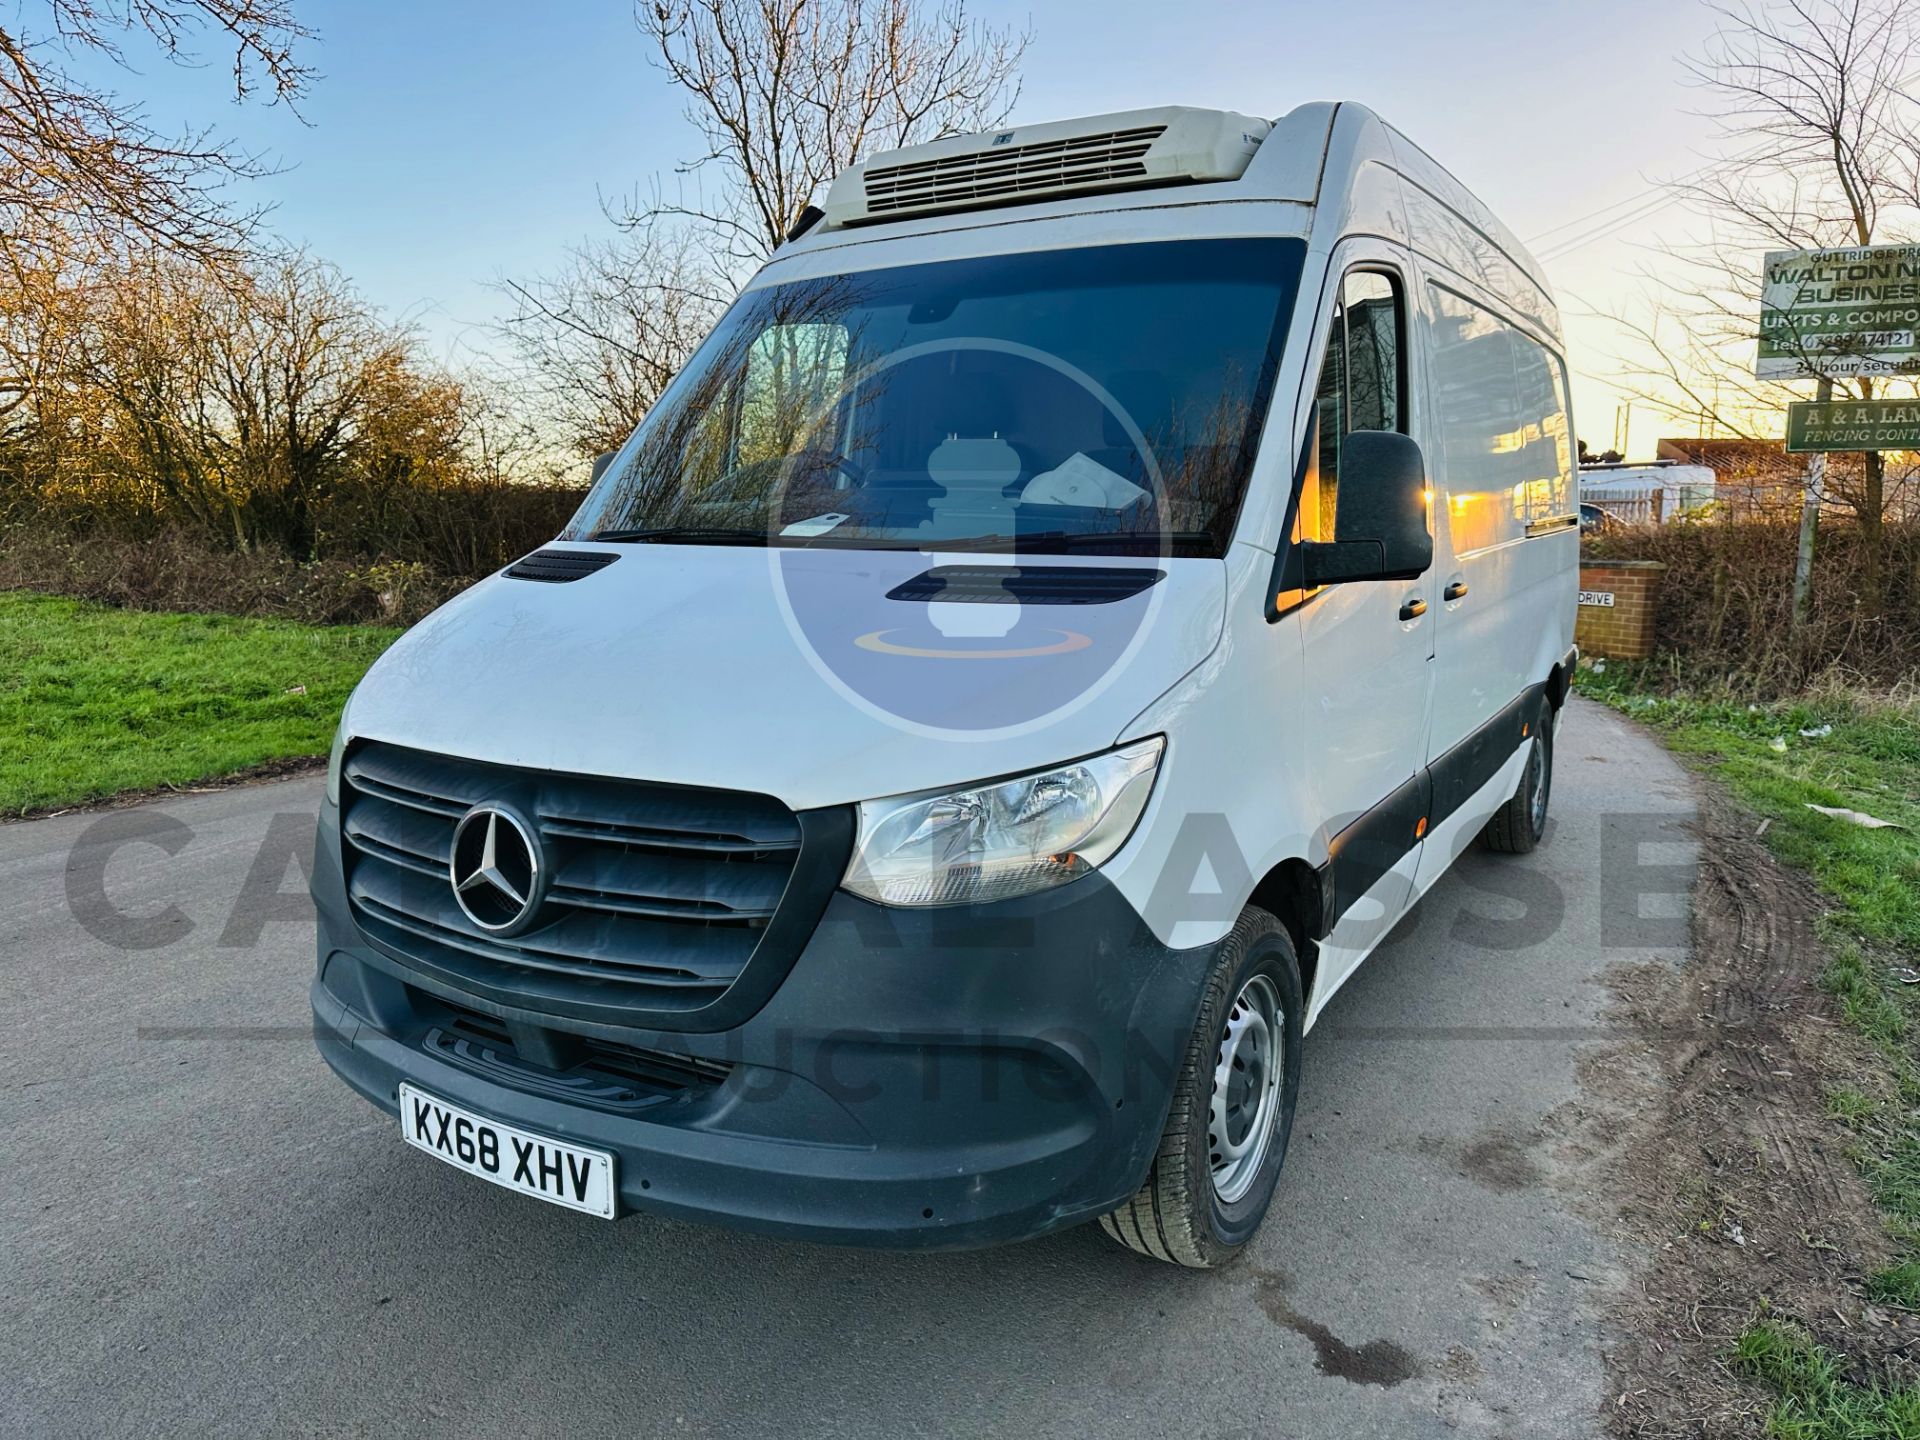 MERCEDES-BENZ SPRINTER 314 CDI *MWB - REFRIGERATED VAN* (2019 - FACELIFT MODEL) *OVERNIGHT STANDBY* - Image 4 of 33